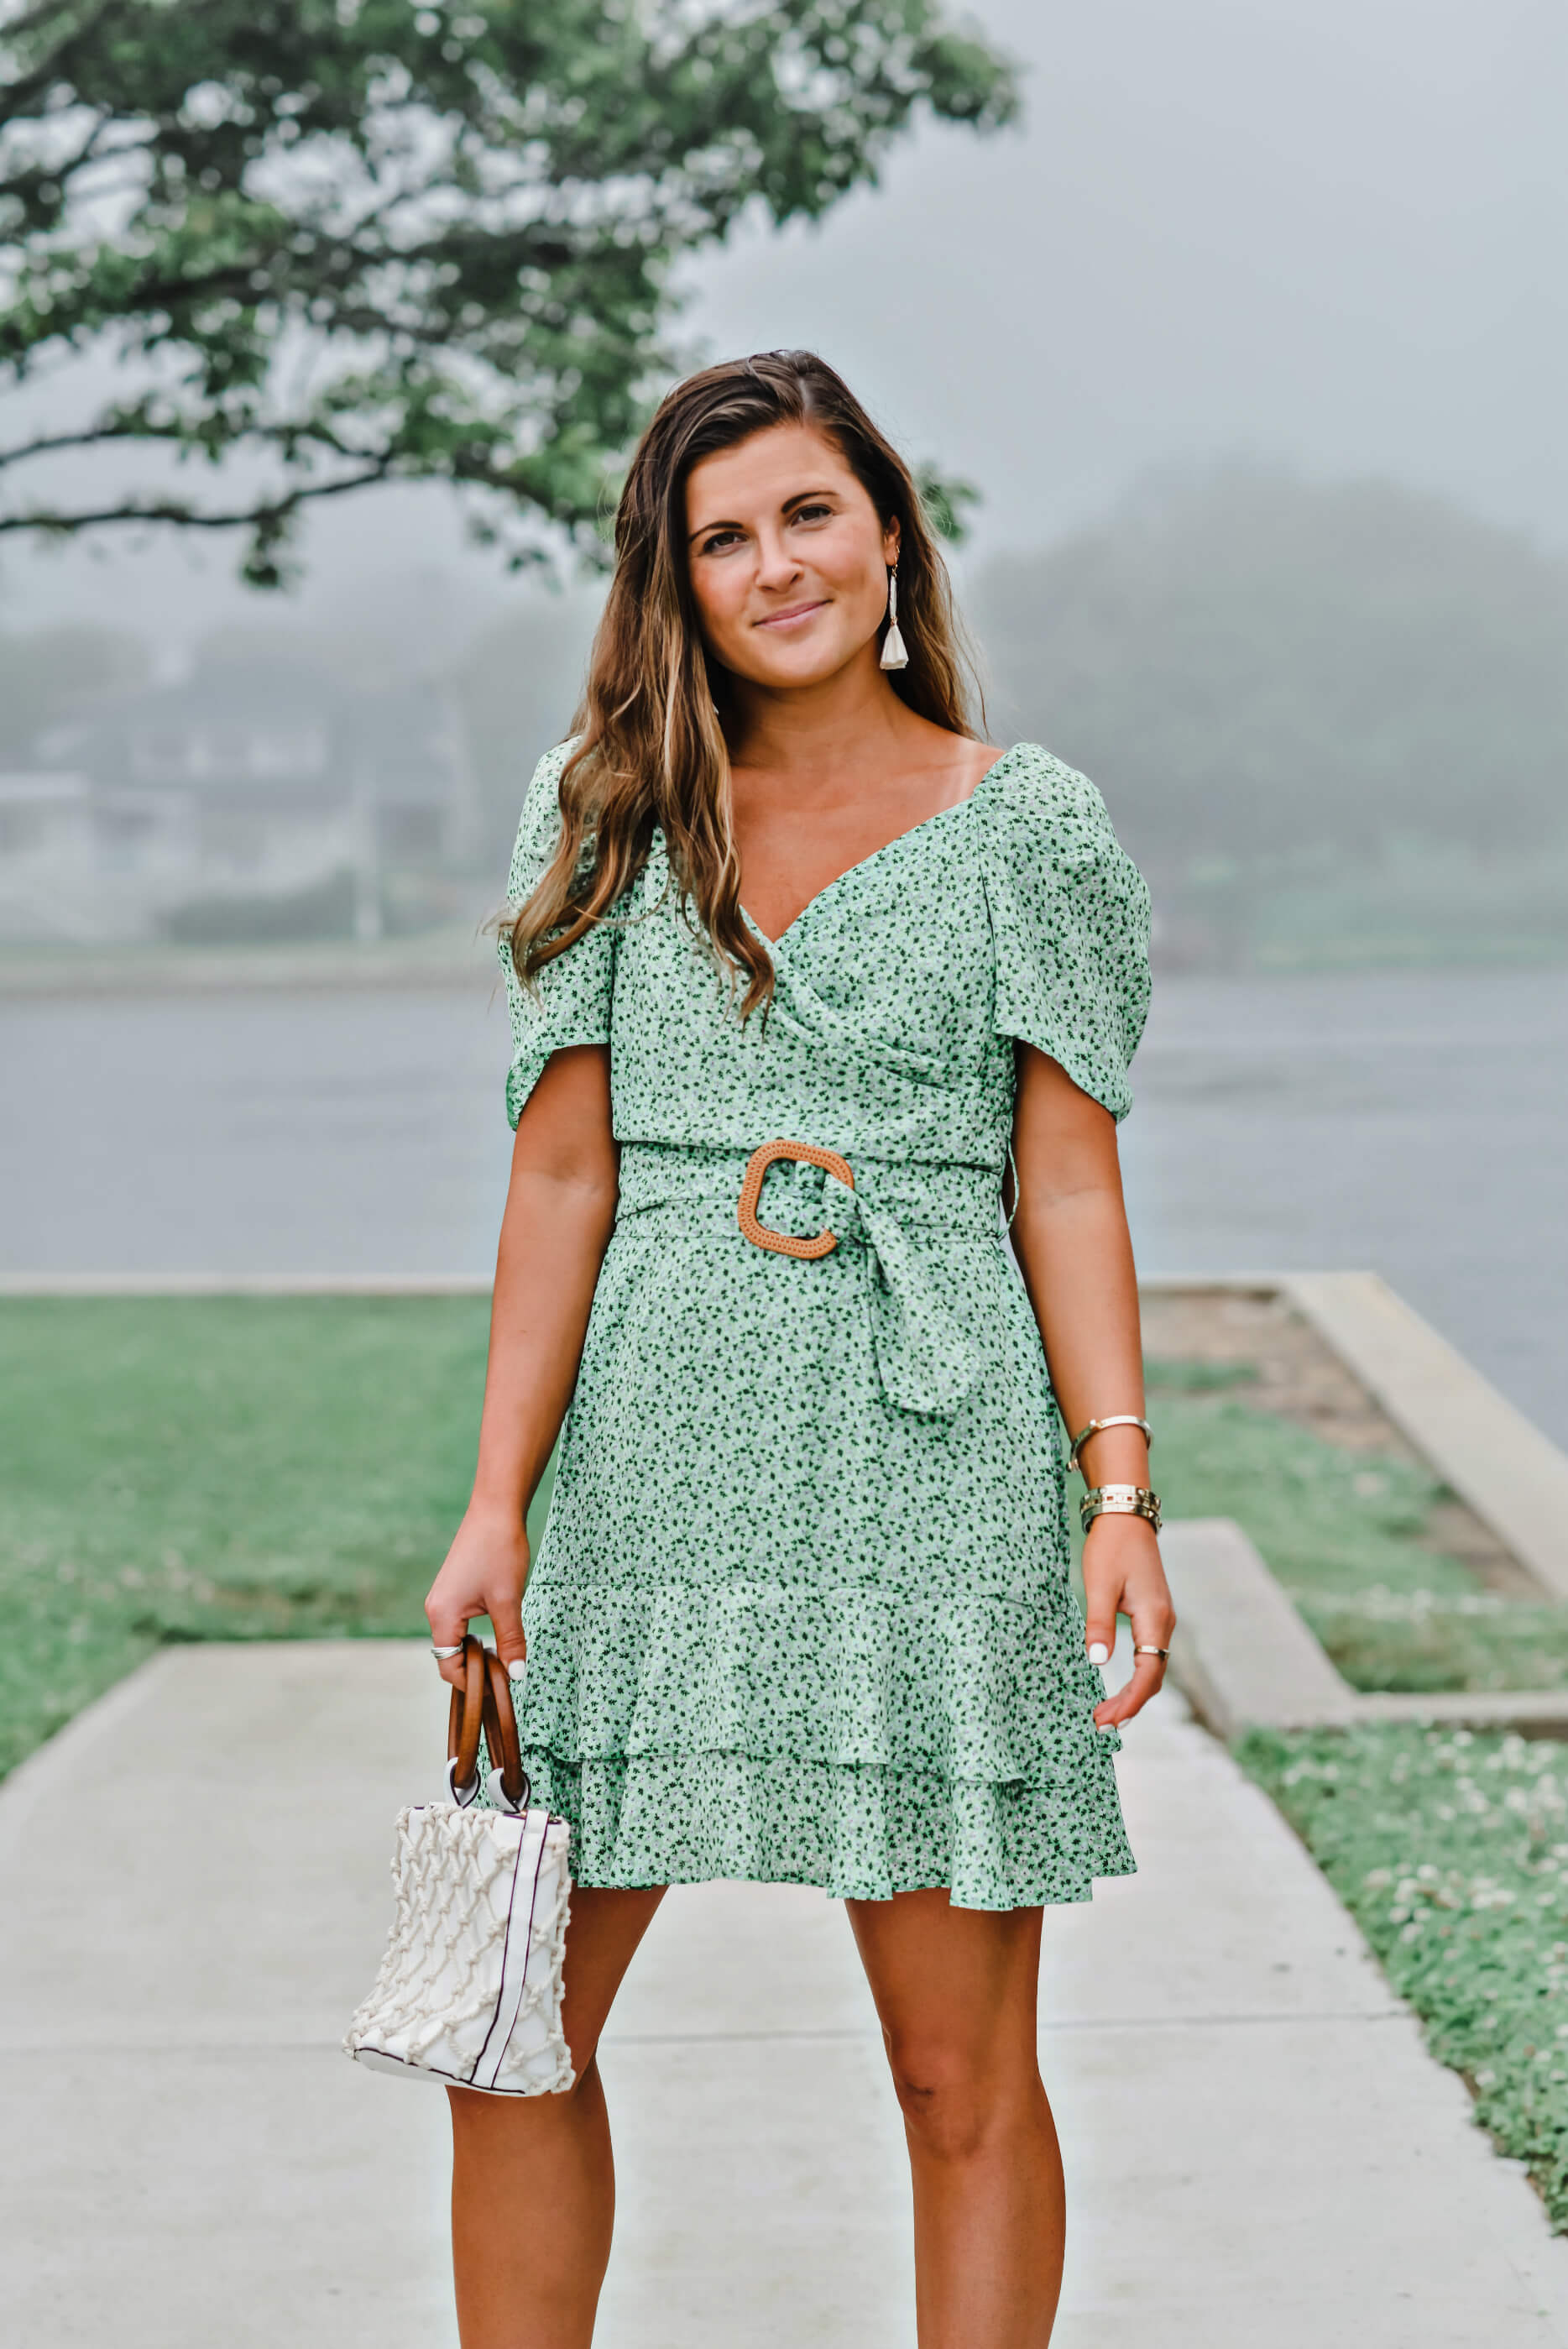 ASOS Green wrap double layer mini dress in ditsy floral print with belt, Summer Dress, Summer Style, Tilden of To Be Bright